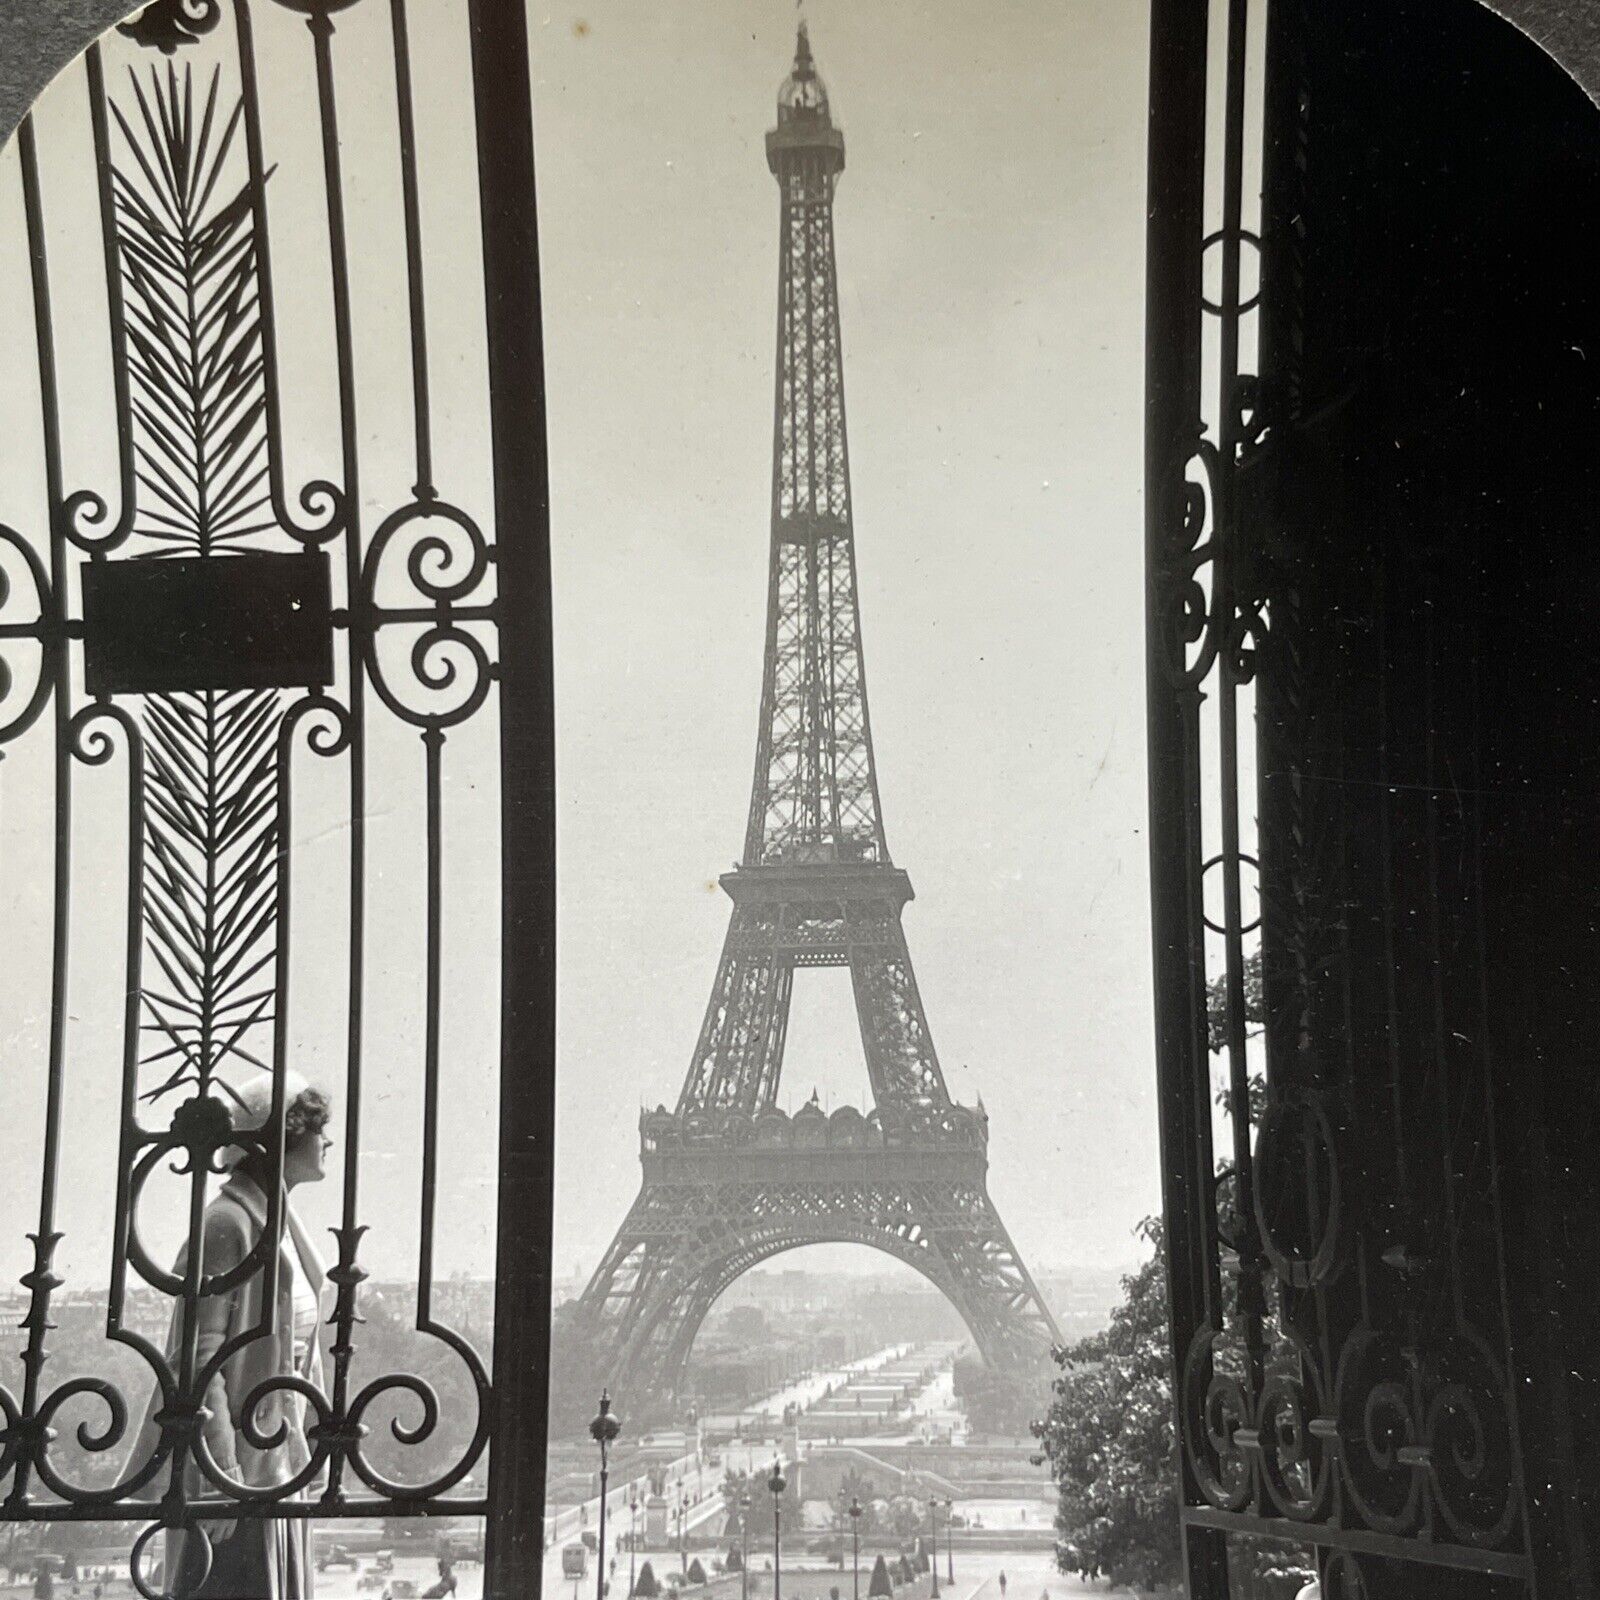 Antique 1930s The Eiffel Tower Paris France Stereoview Photo Card V2945